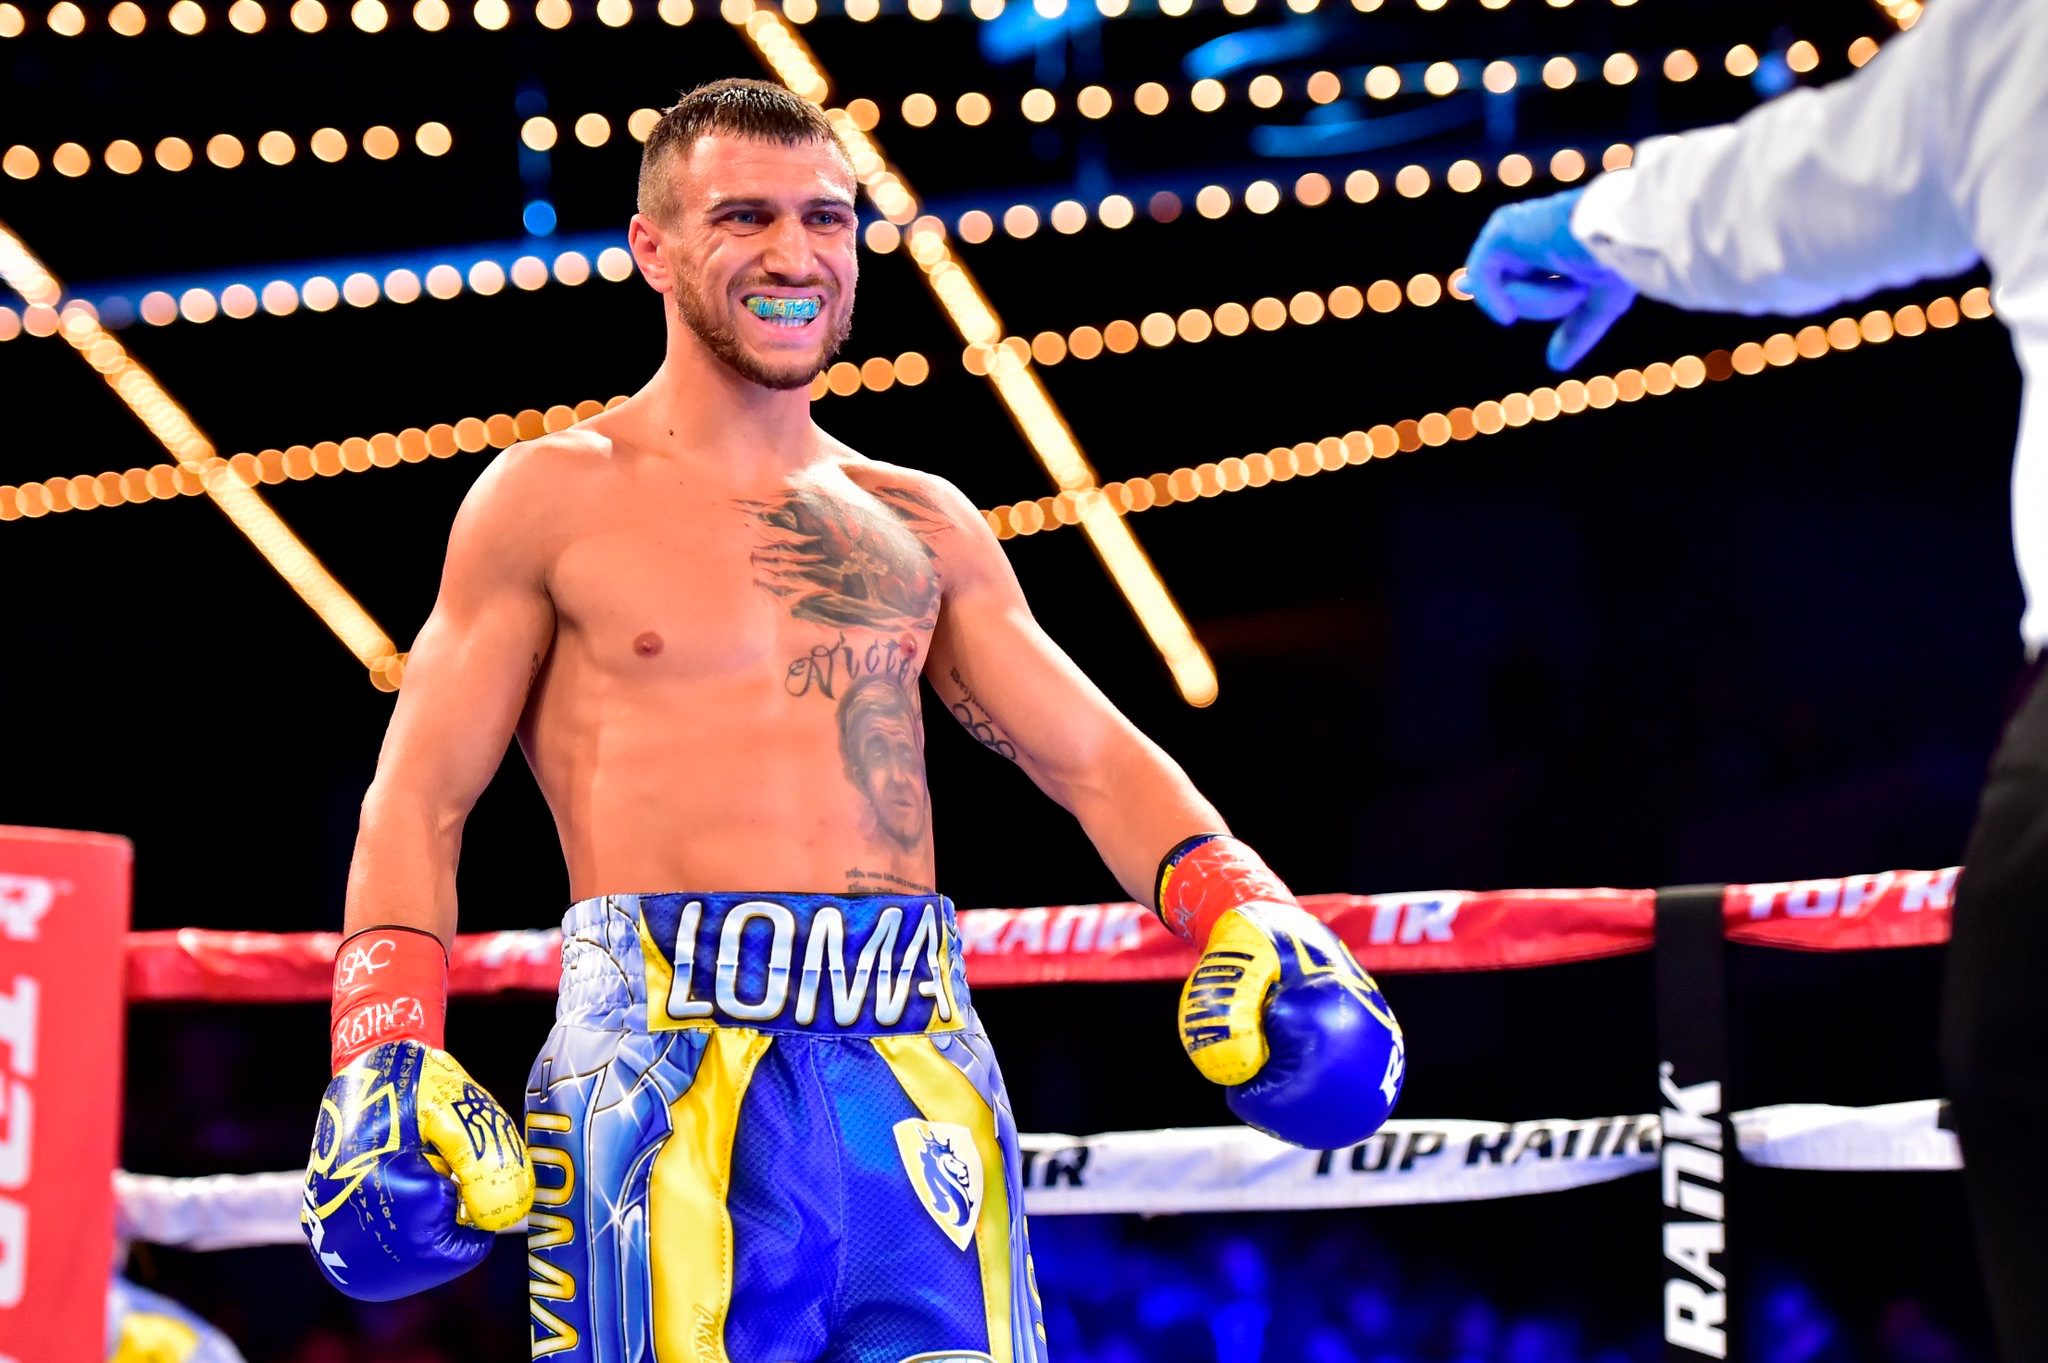 Ukraines Lomachenko returns to ring after fighting for his country